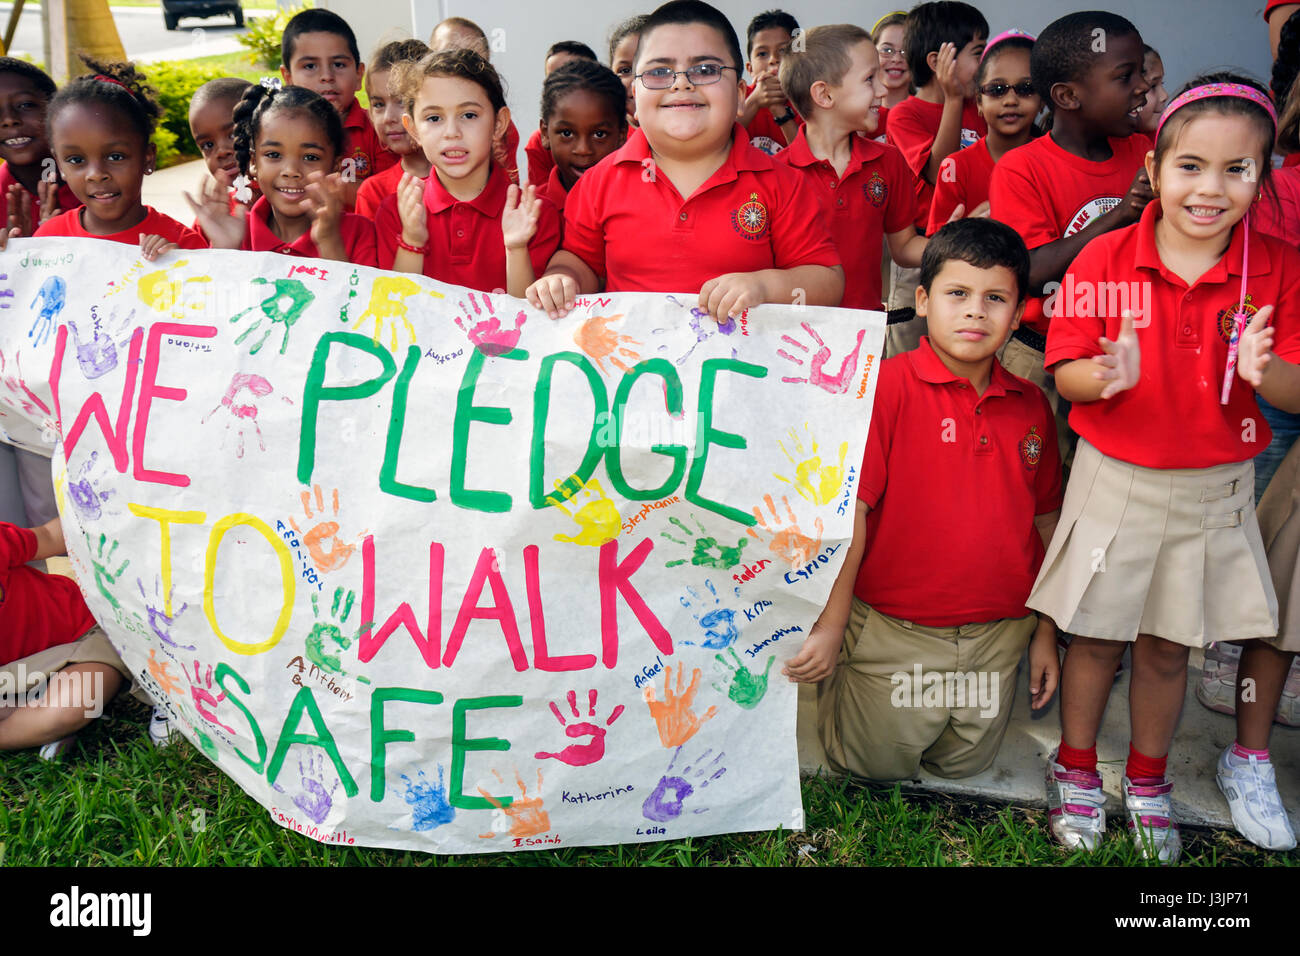 Miami Florida,Spanish Lake Elementary School,International Walk to School Day,student students education pupil youth,safety poster contest,parade,mult Stock Photo